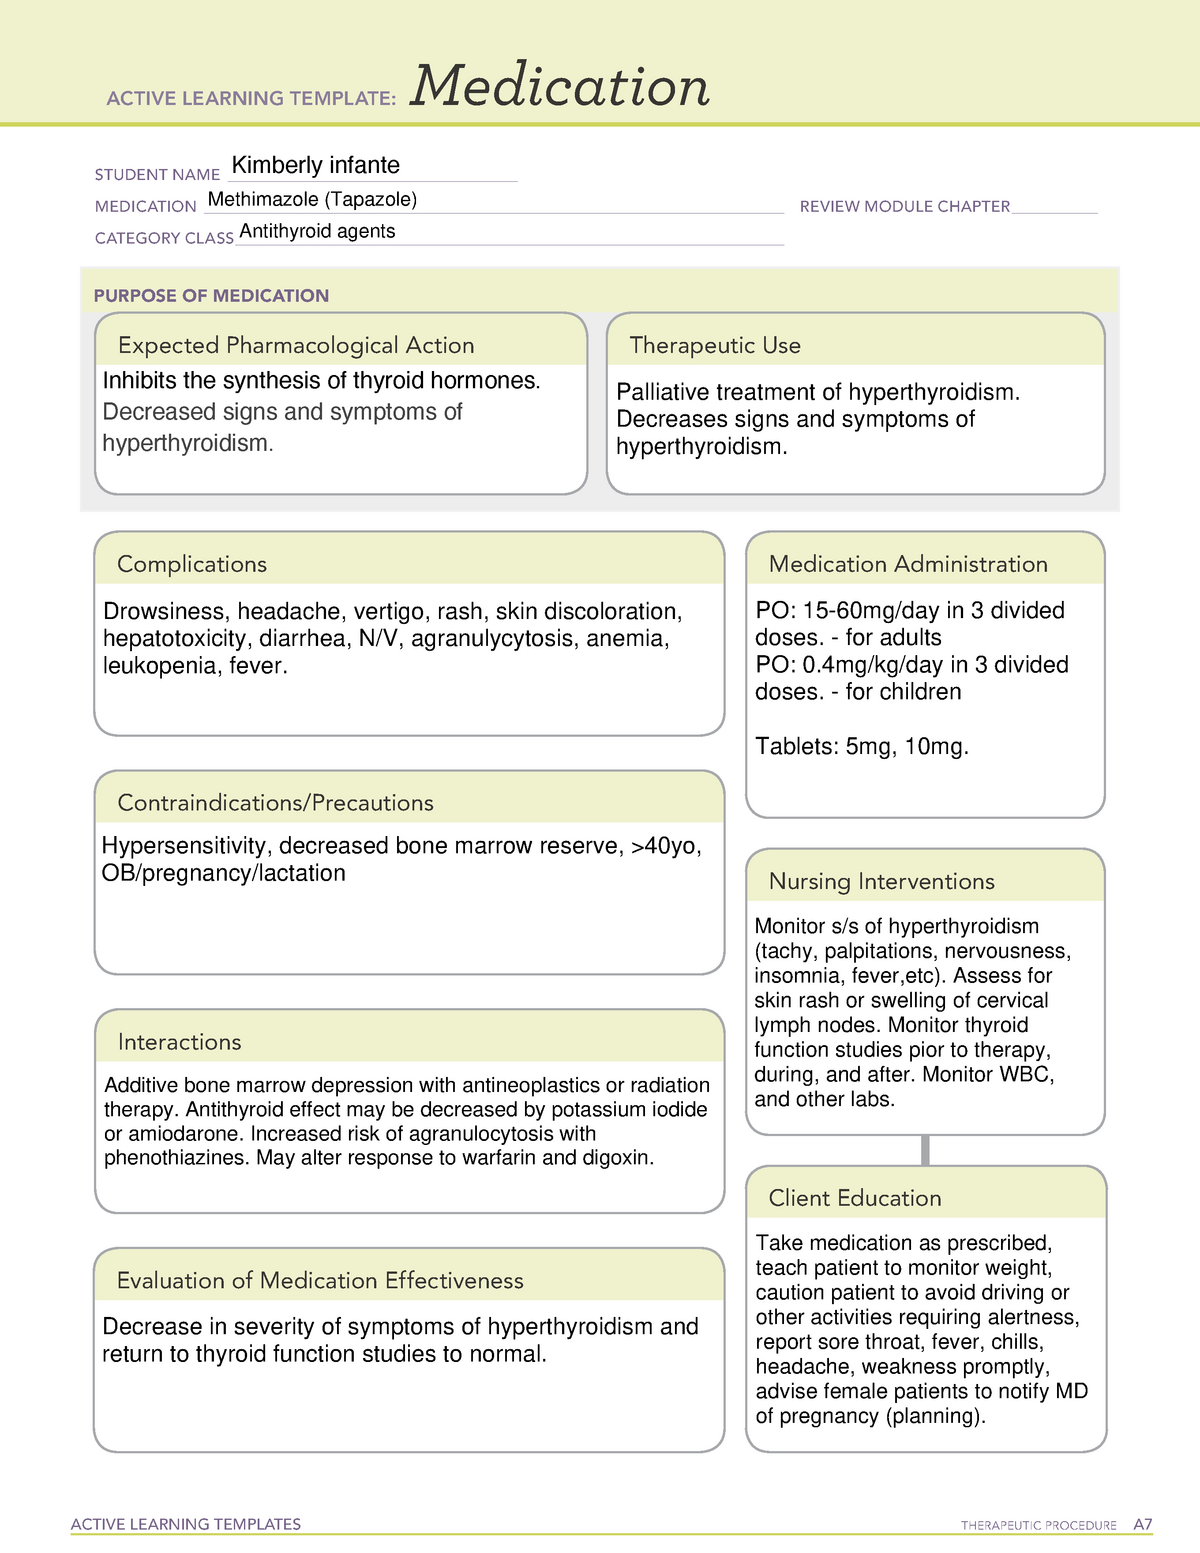 med-card-methimazole-medication-ati-template-active-learning